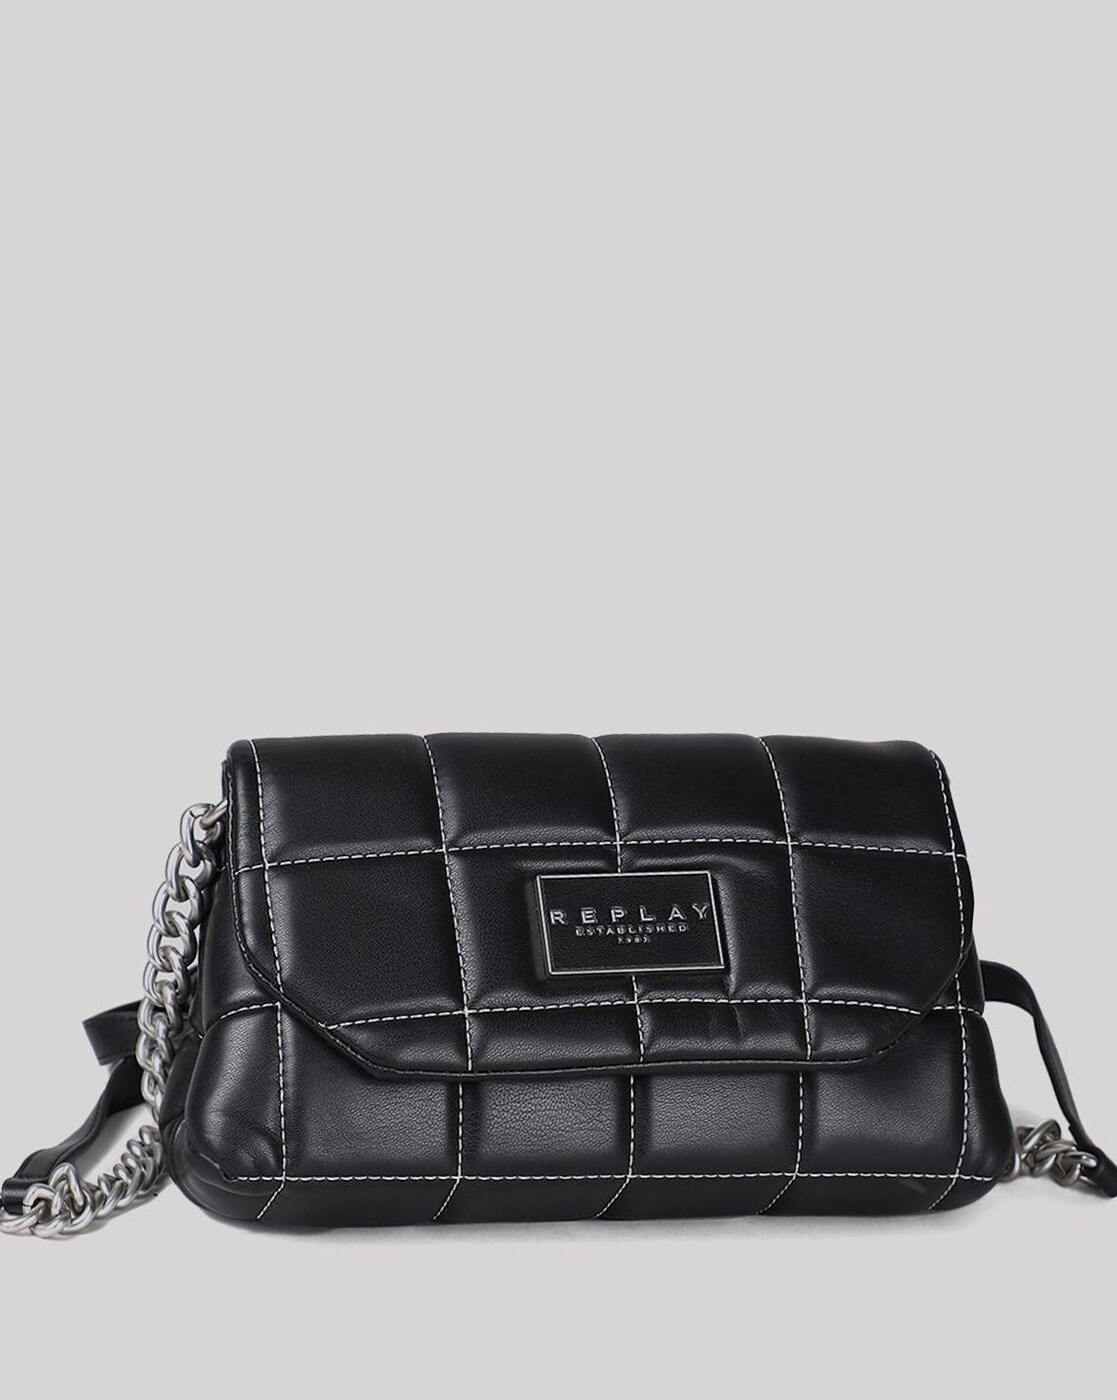 Elevate your style with this trendy Replay shoulder bag